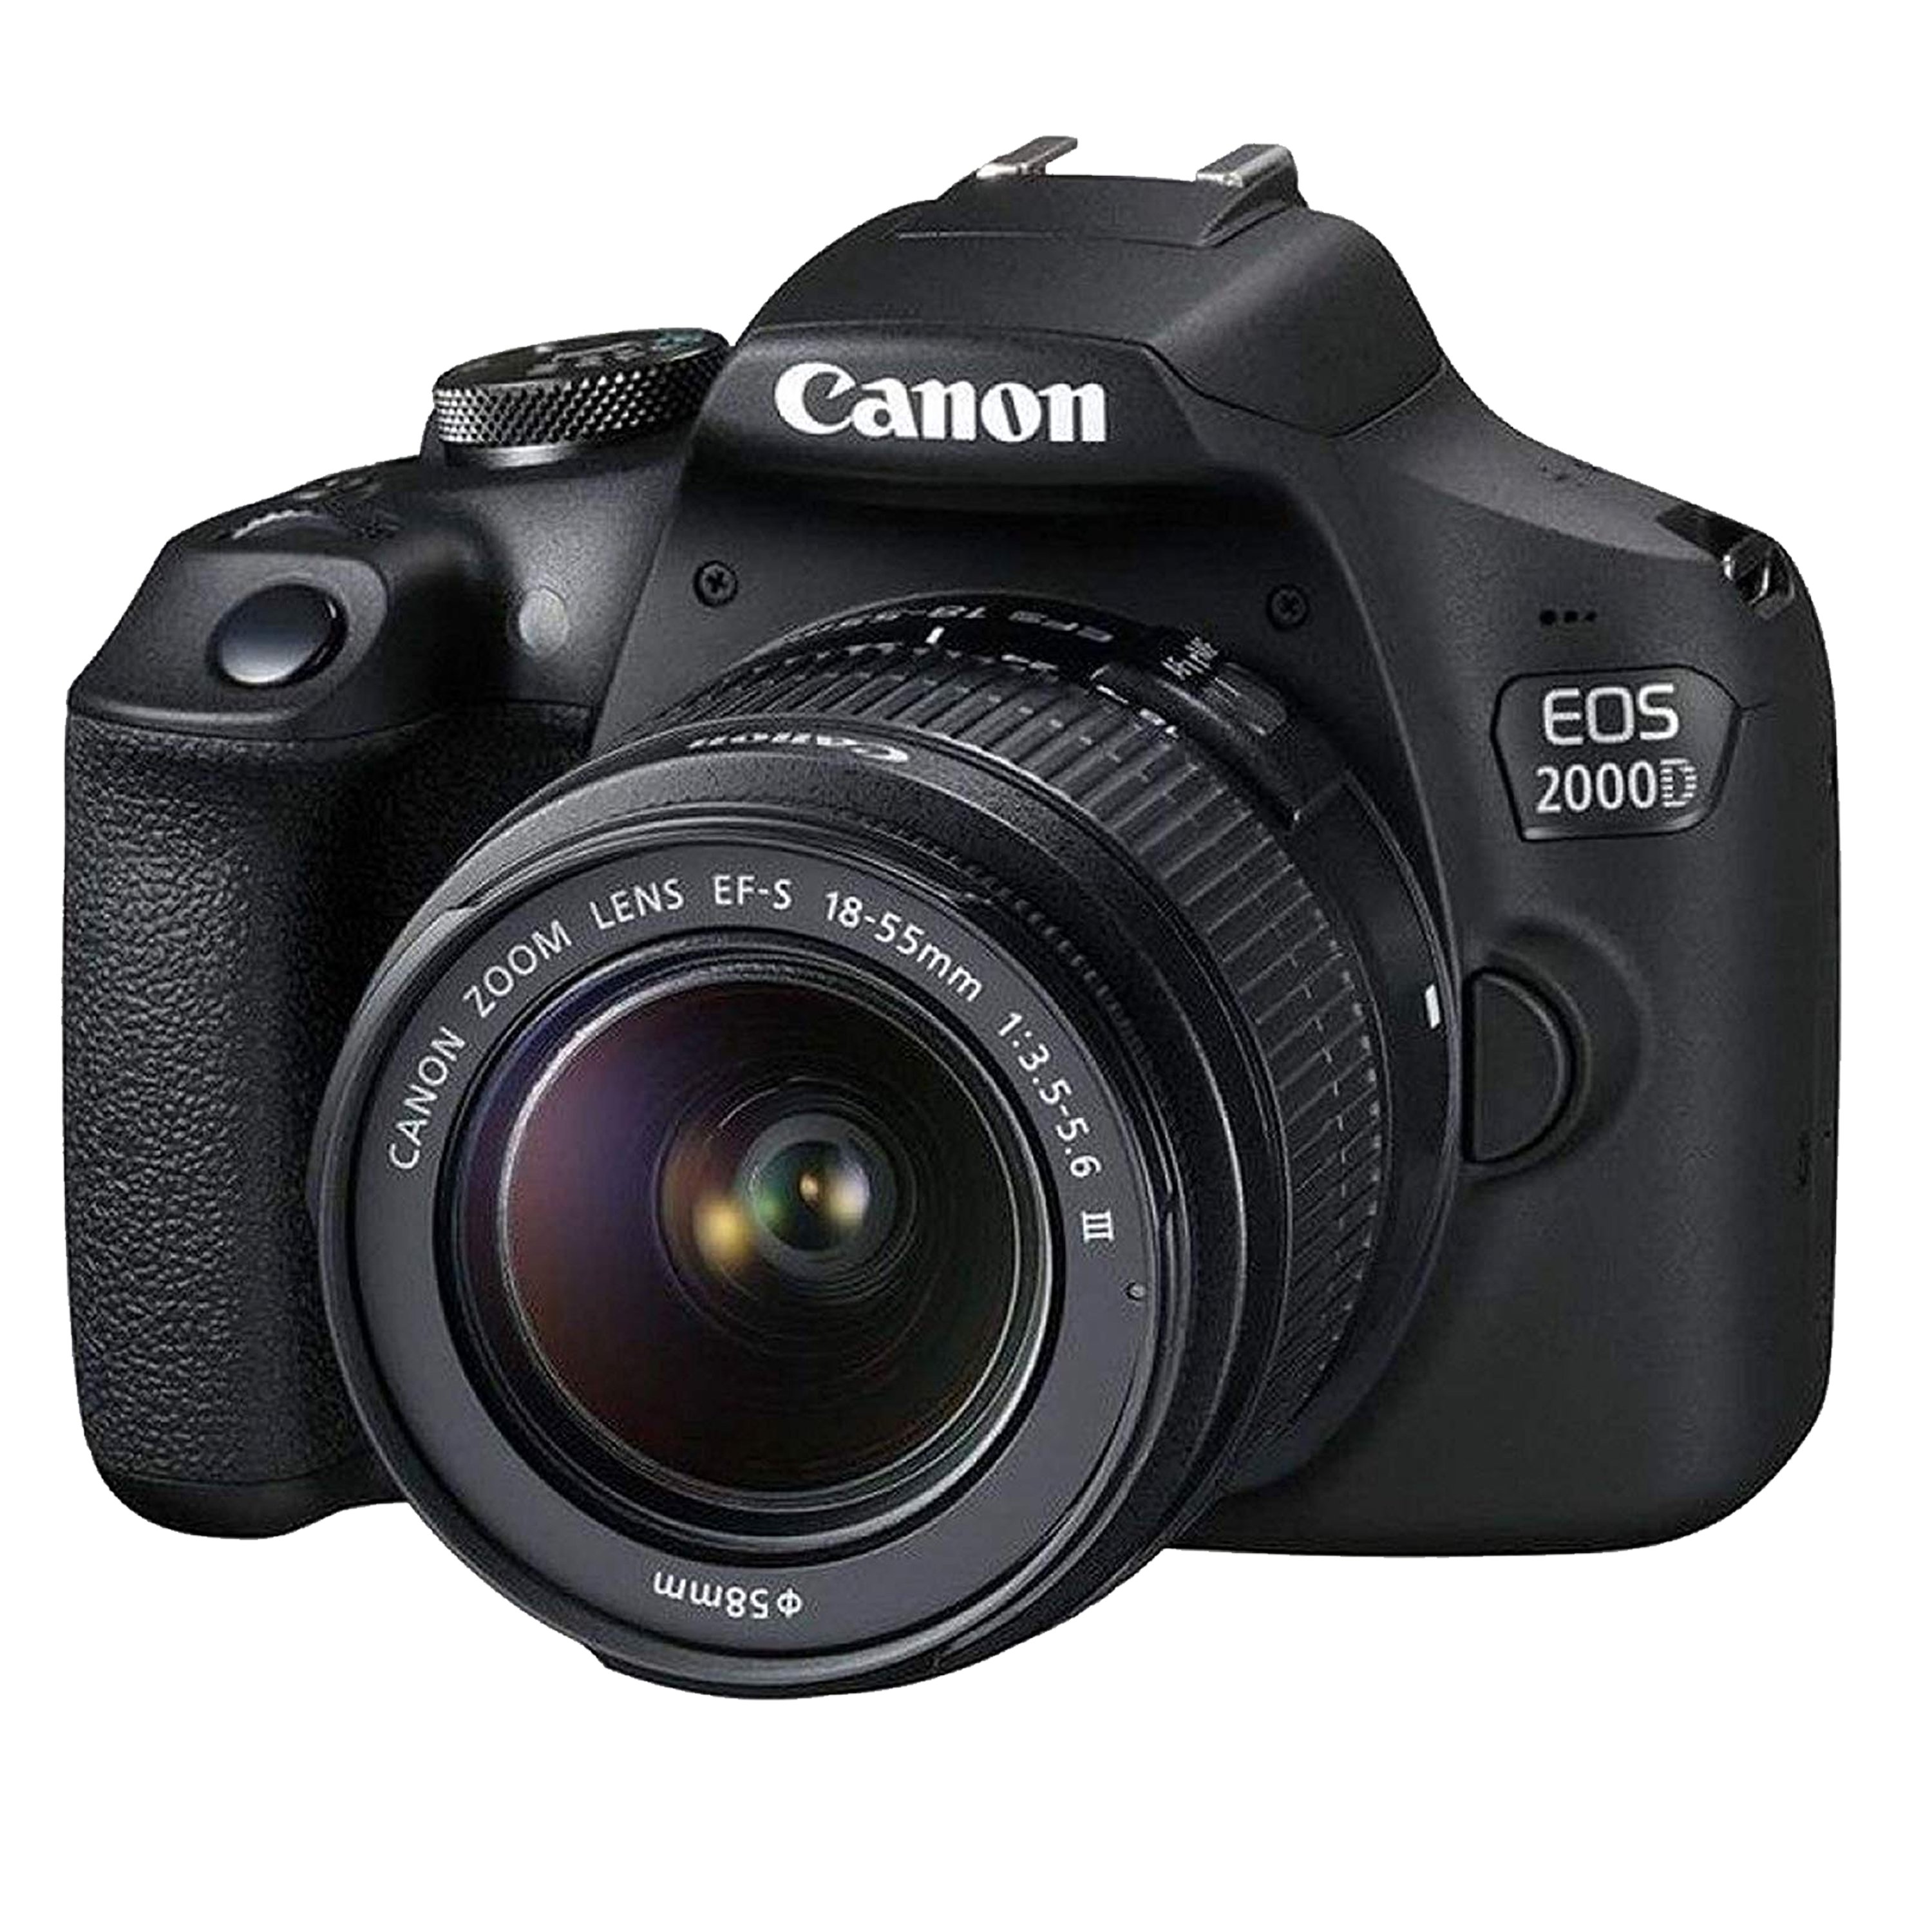 Canon EOS 2000D Rebel T7 DSLR Camera with 18-55mm f/3.5-5.6 Zoom Lens + + 128GB Card, Tripod, Flash, and More 20pc Bundle - image 2 of 8